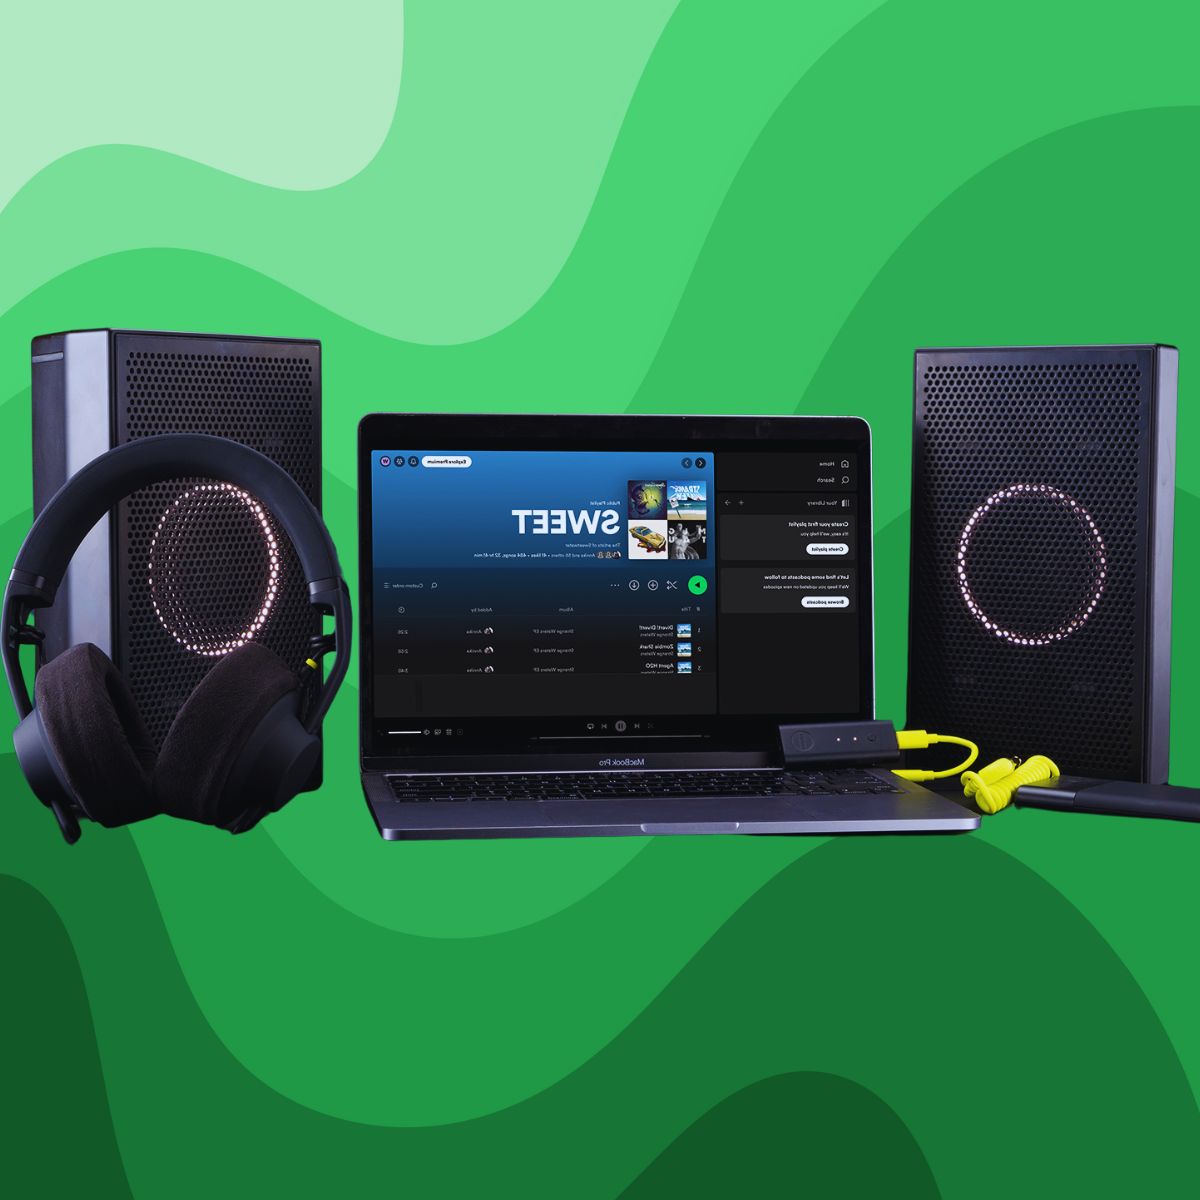 With headphones and speakers, you can get an immersive sound experience.